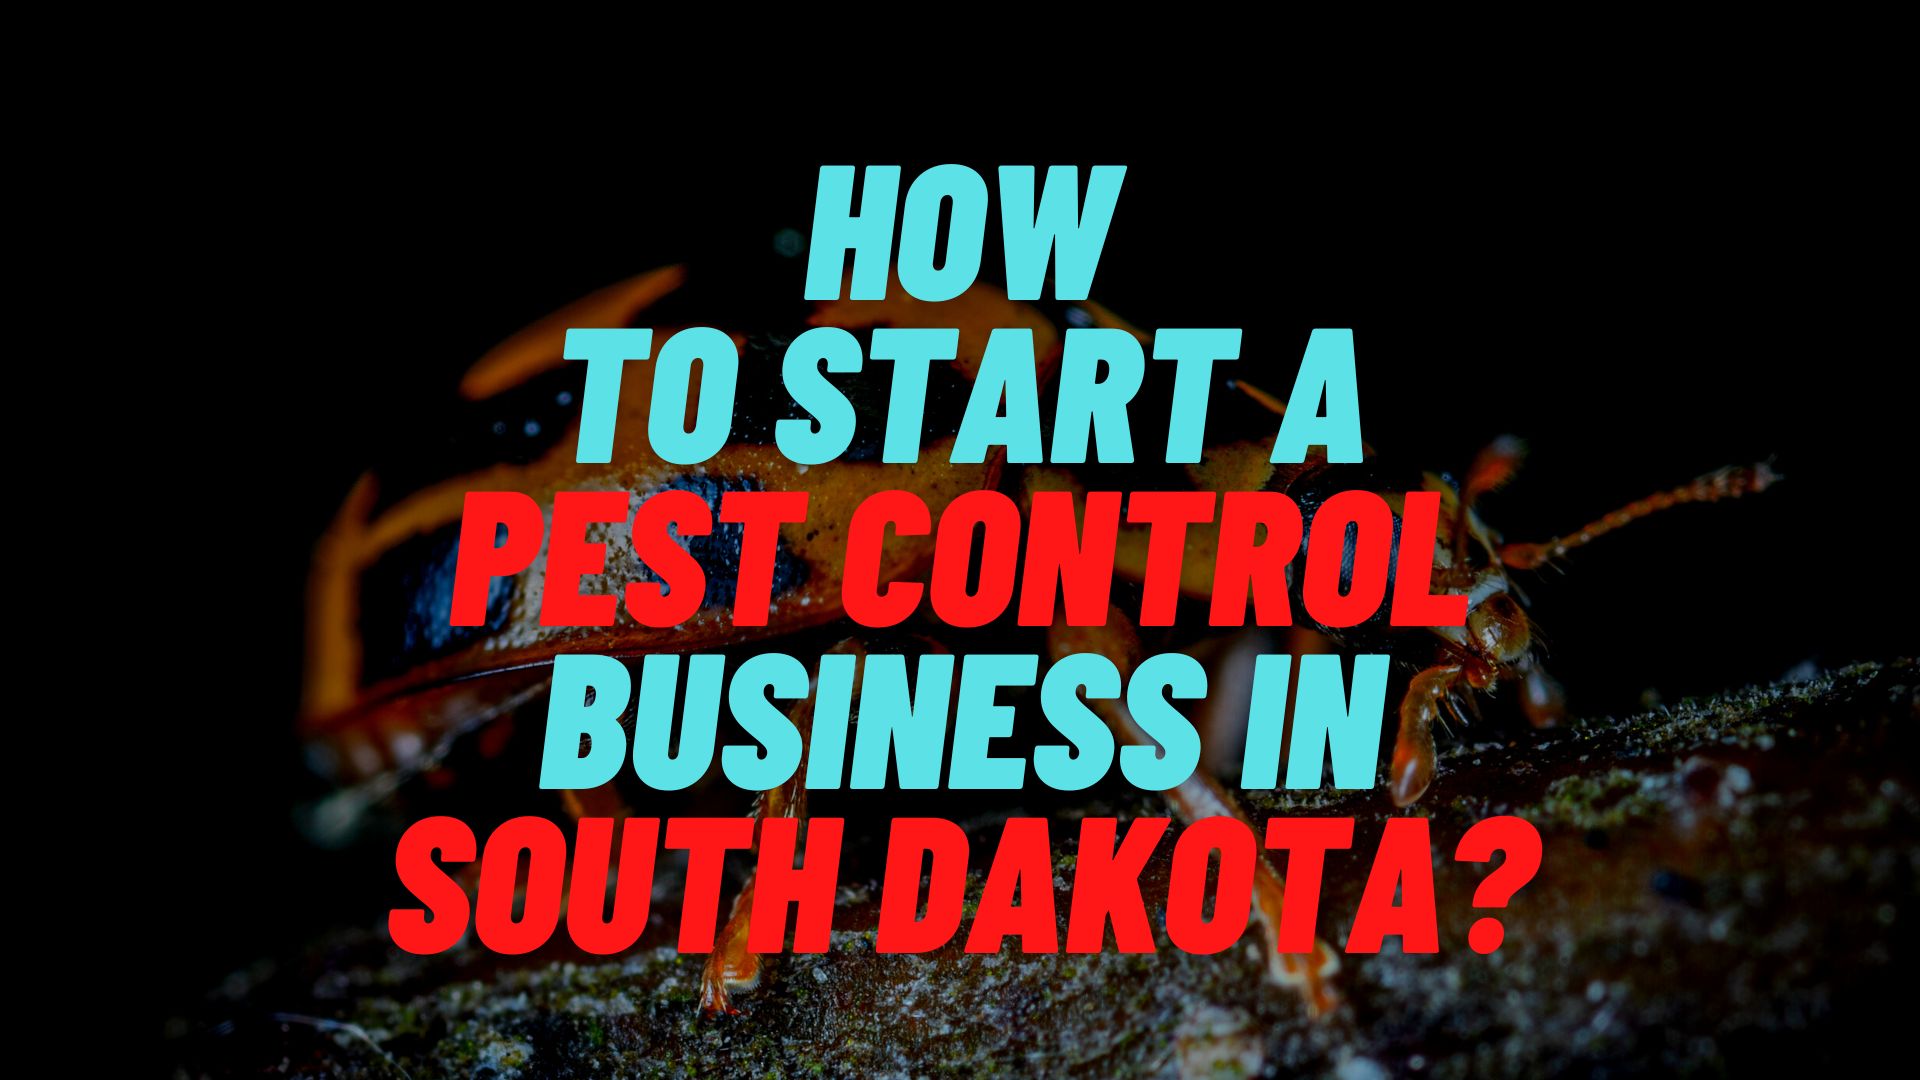 How to start a pest control business in South Dakota?